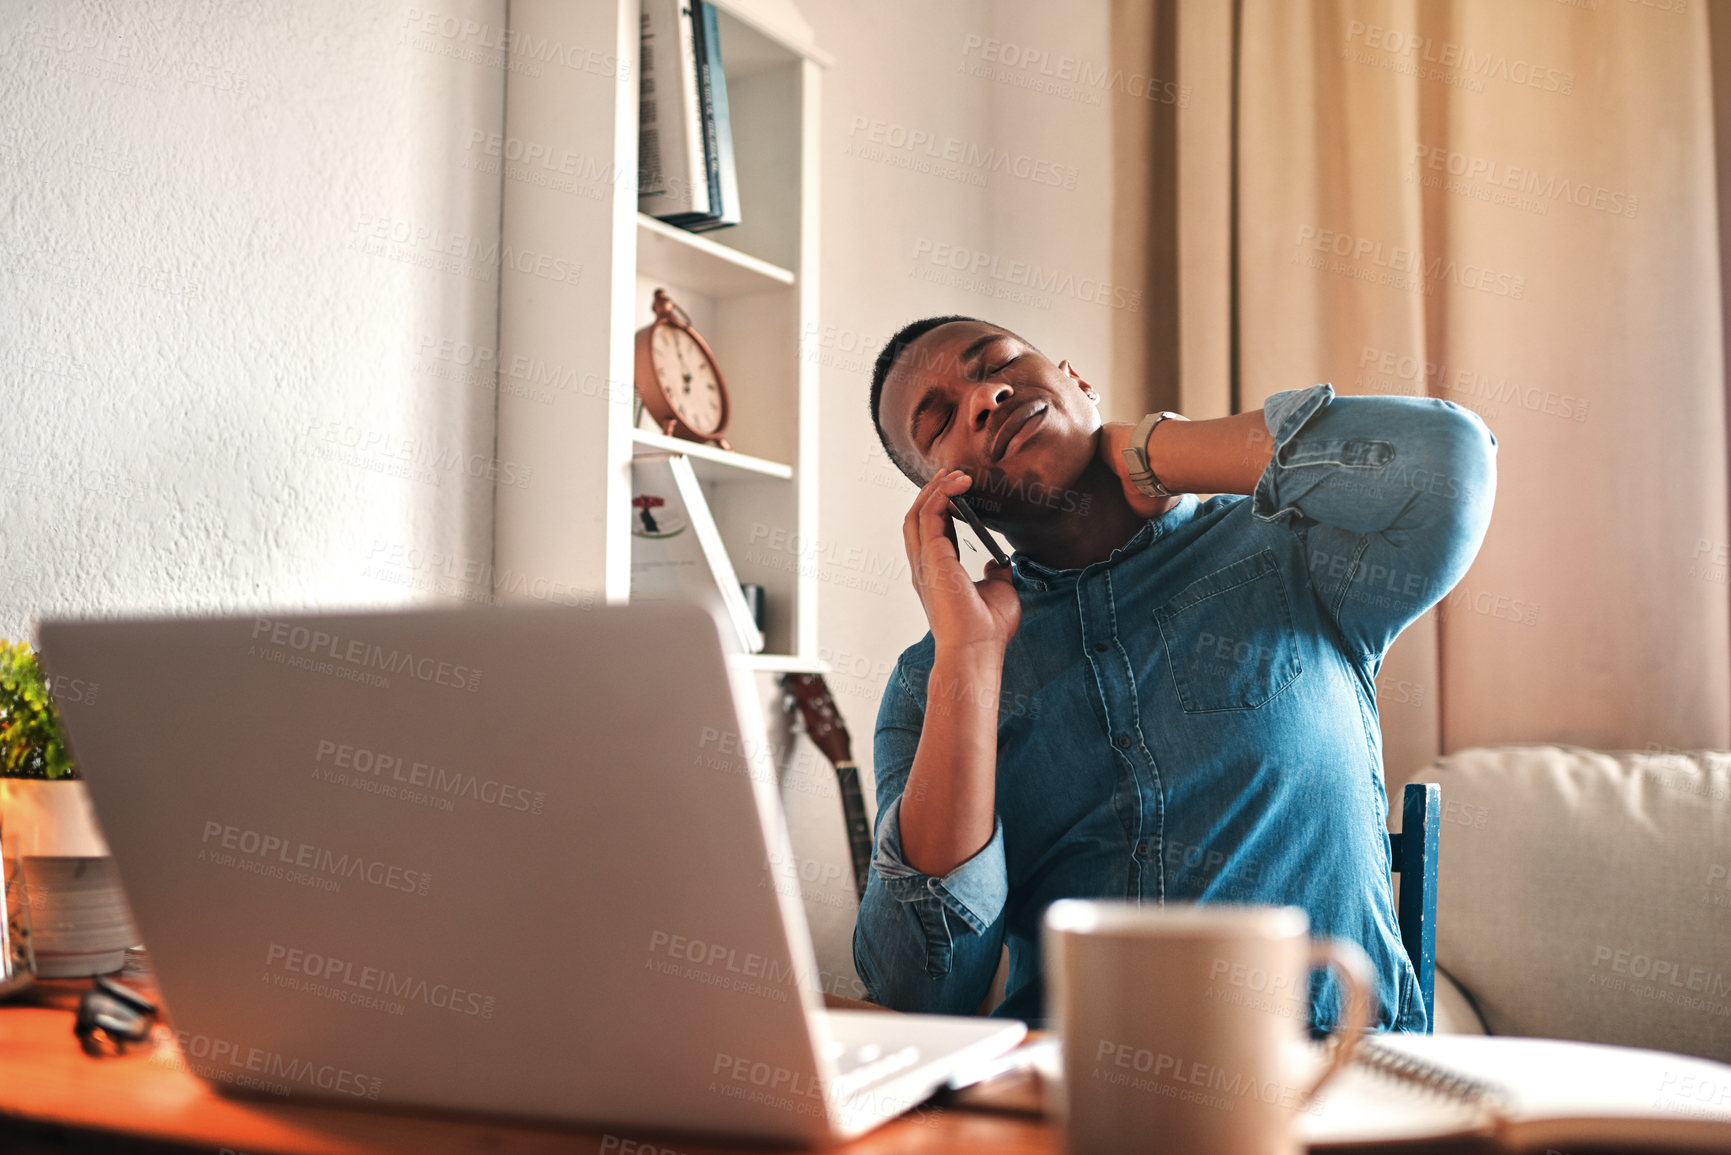 Buy stock photo Tired business man with neck pain on a laptop and phone call, looking stressed and stretching bad, strained muscle or sore back. Stressed, multitasking guy having a difficult time working from home